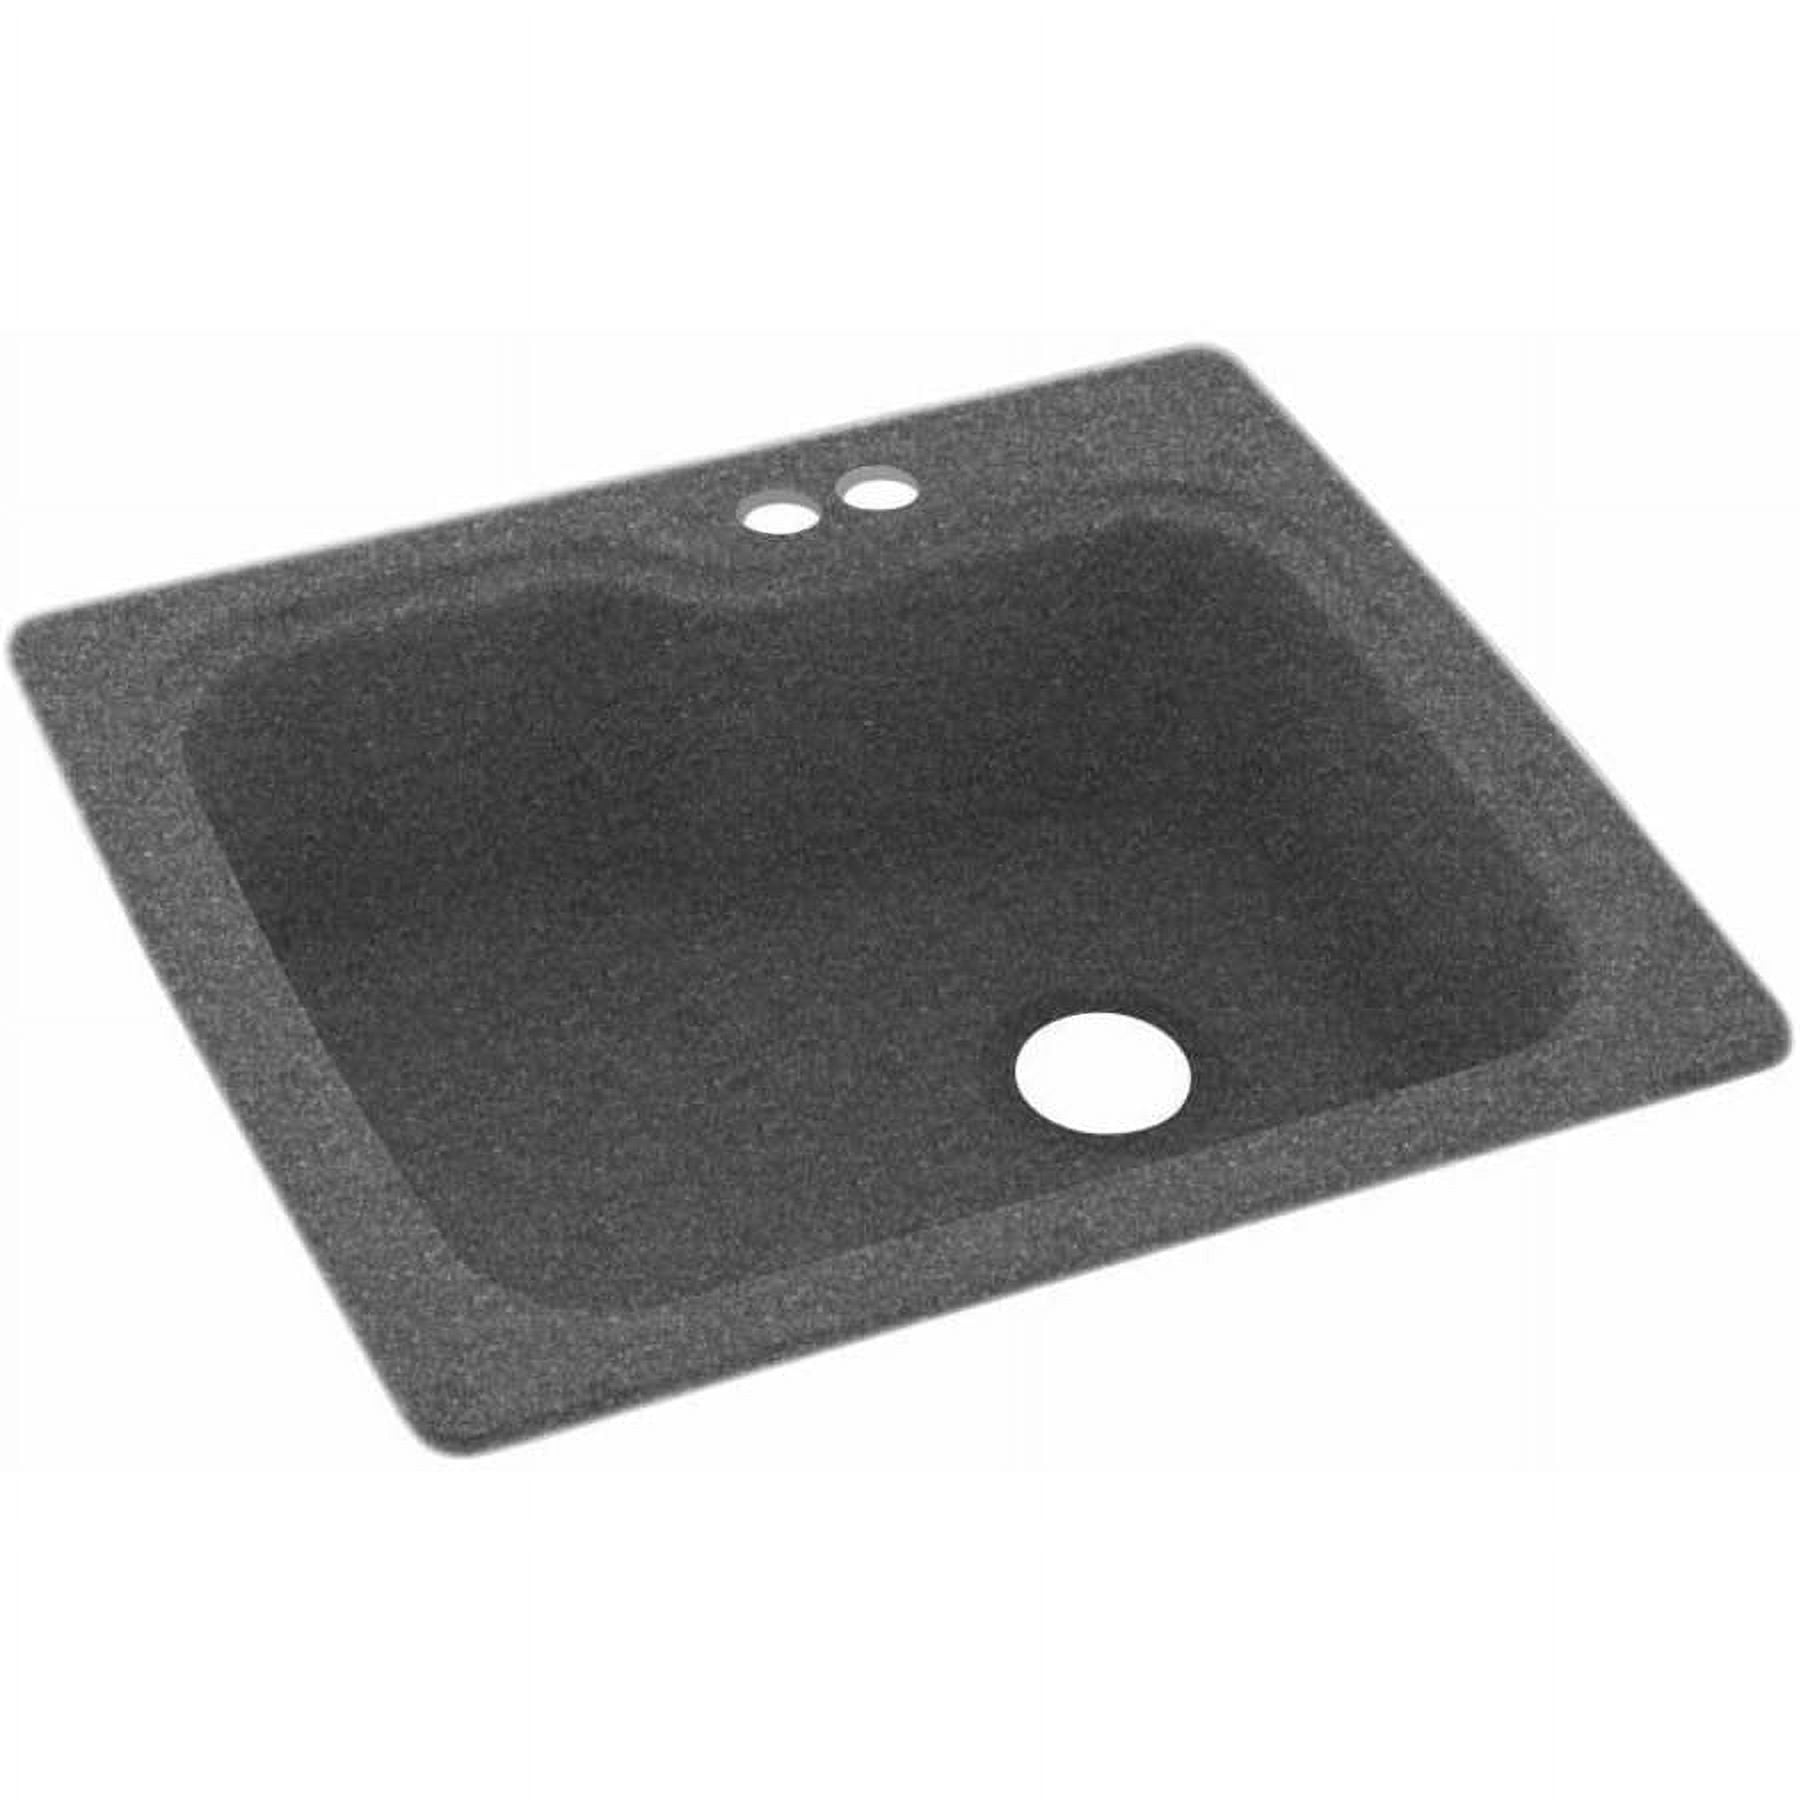 Swan Solid Surface Kitchen Sink 25 X 22 With 2 Faucet Holes 26625aa1 B465 431e Bf6c Cf9b15cd5be1.748d5b736572810b6ff2f9288ef255f0 